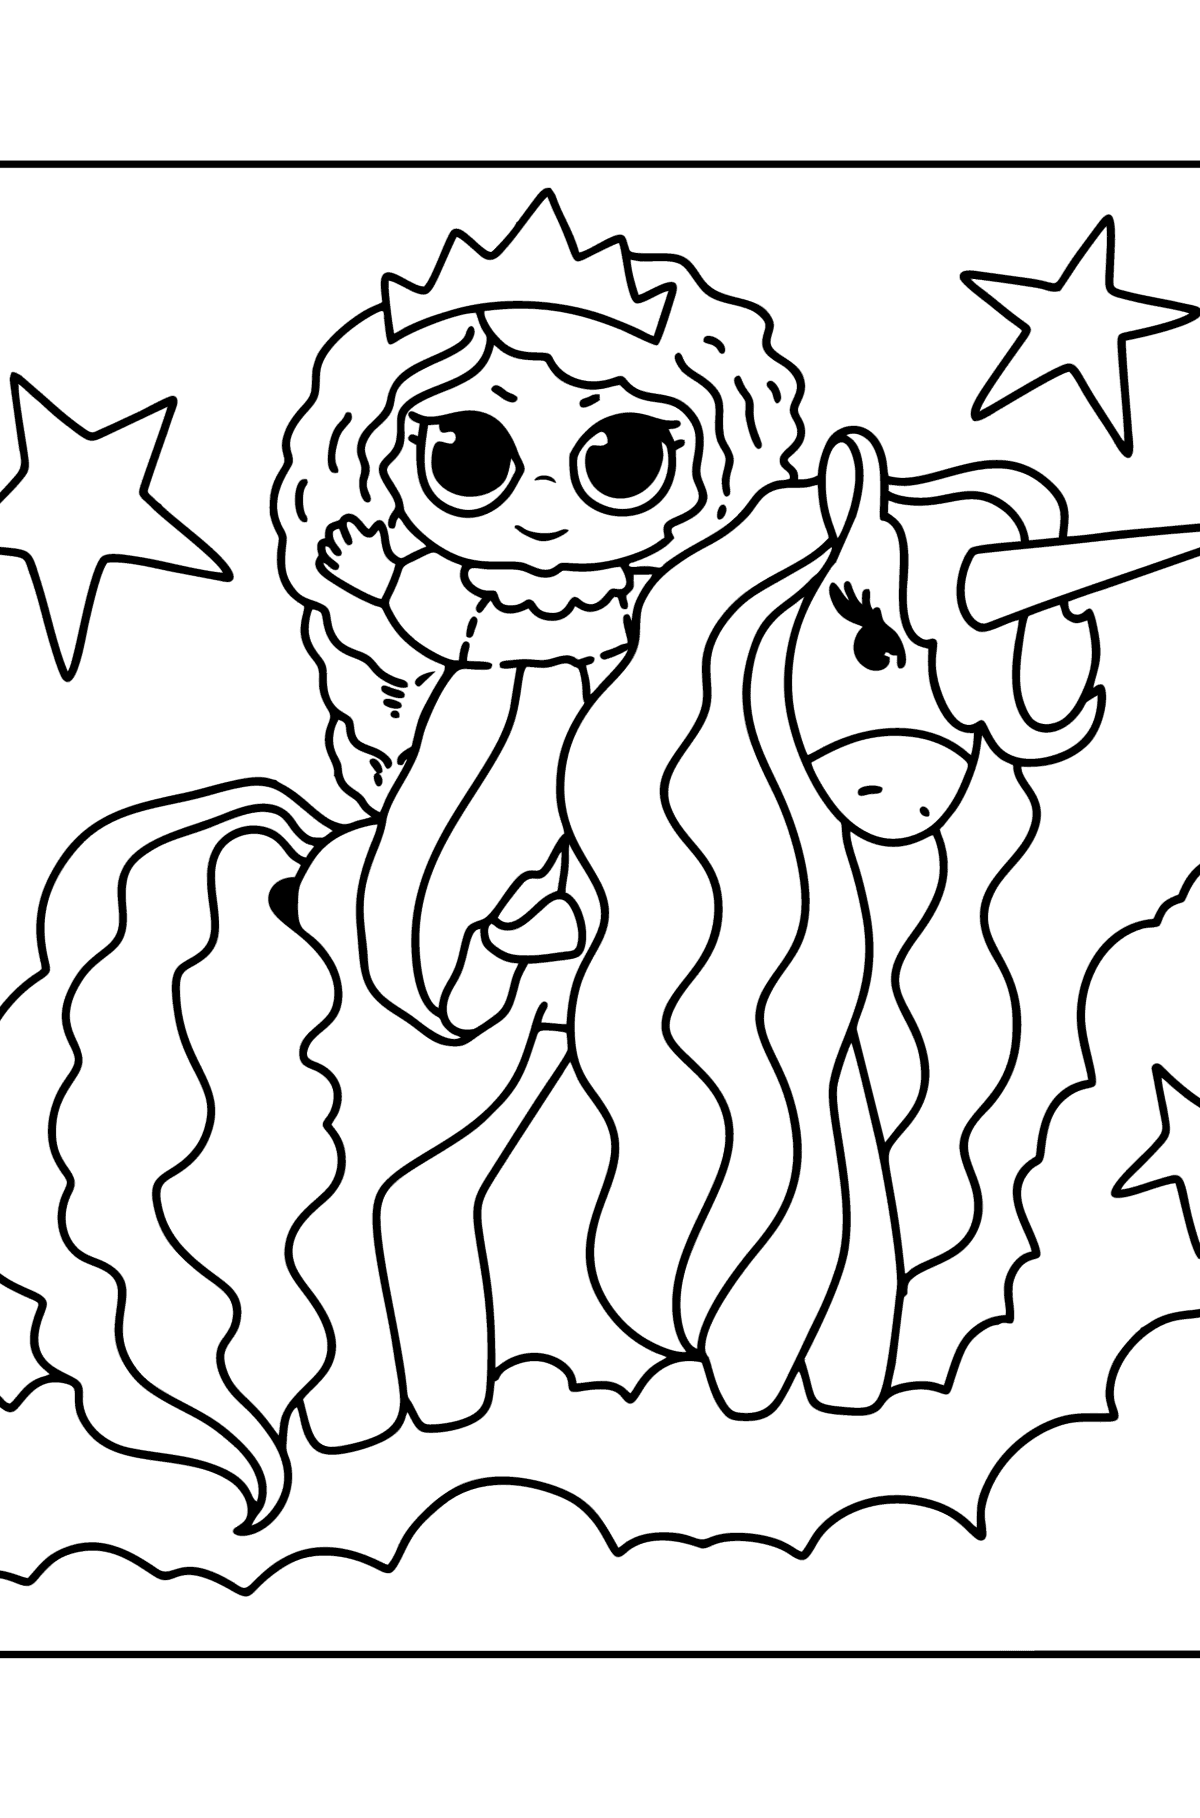 Princess and unicorn coloring page - Coloring Pages for Kids